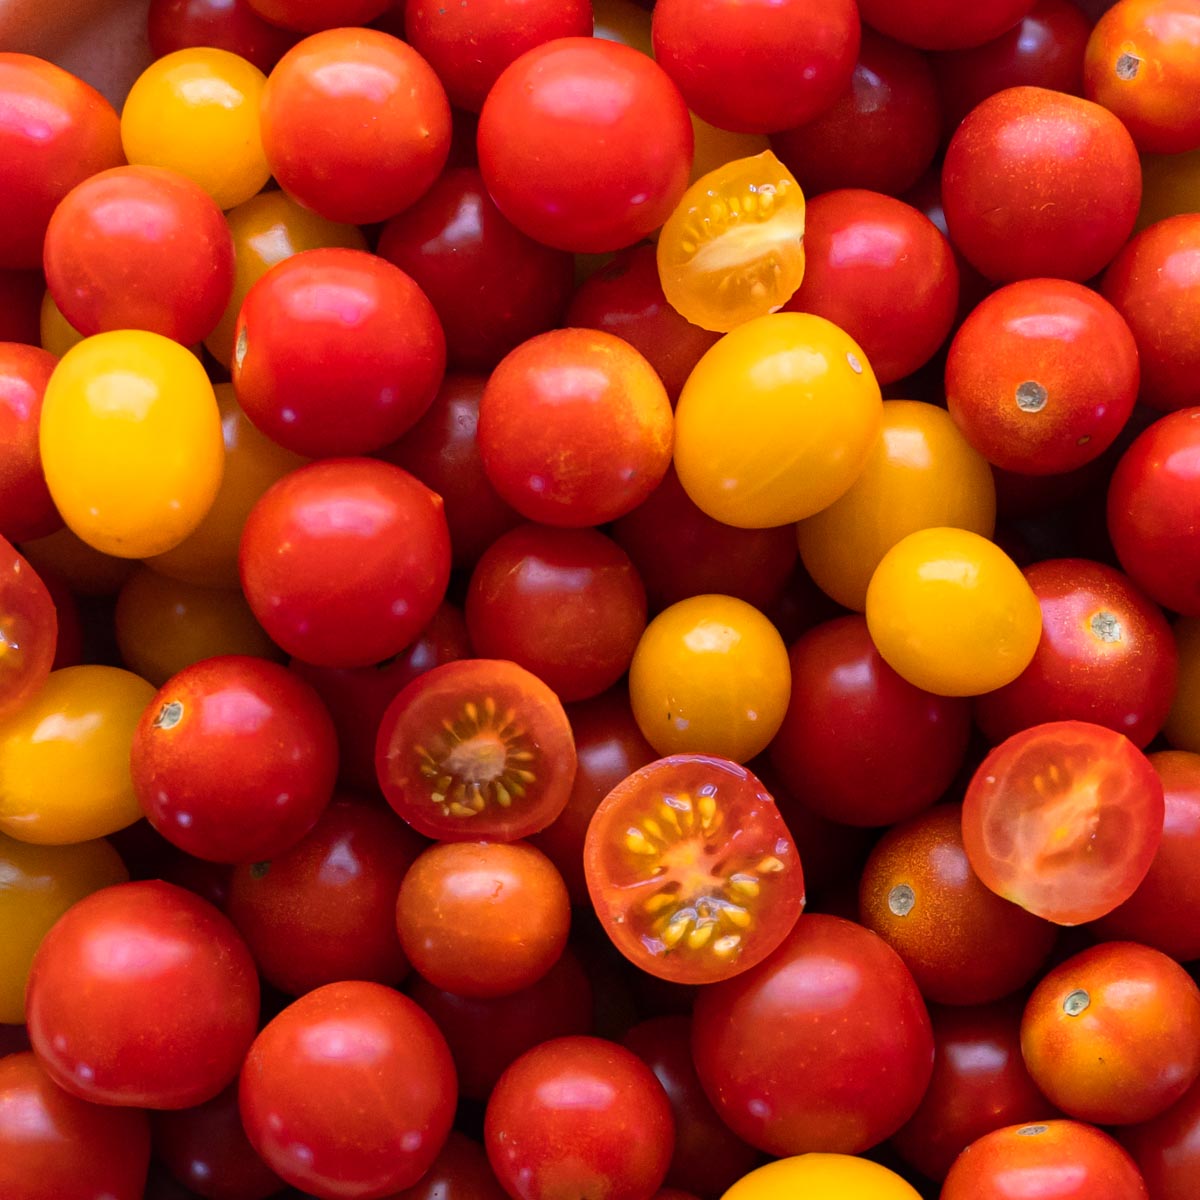 Top down of cherry tomatoes with yellow and red colors. Some of the tomatoes are sliced in half.